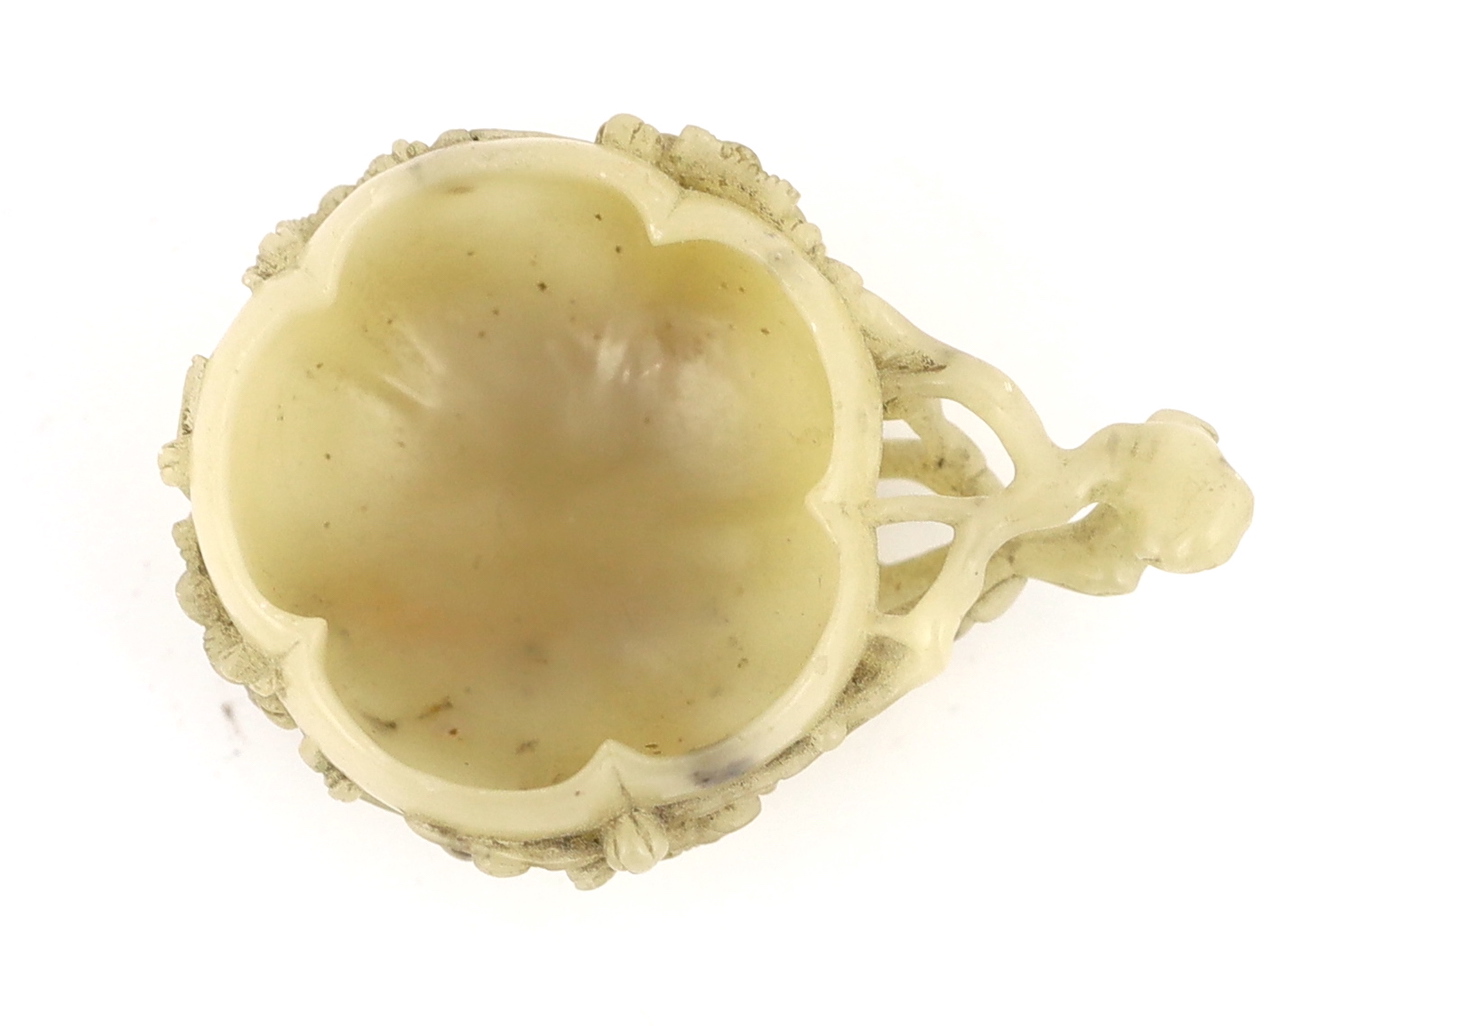 A Chinese creamy white soapstone ‘plum blossom’ cup, 18th/19th century, carved in high relief and open work with prunus branches and blossom, the stone of creamy white tone with some pale russet inclusions, 7.4cm across